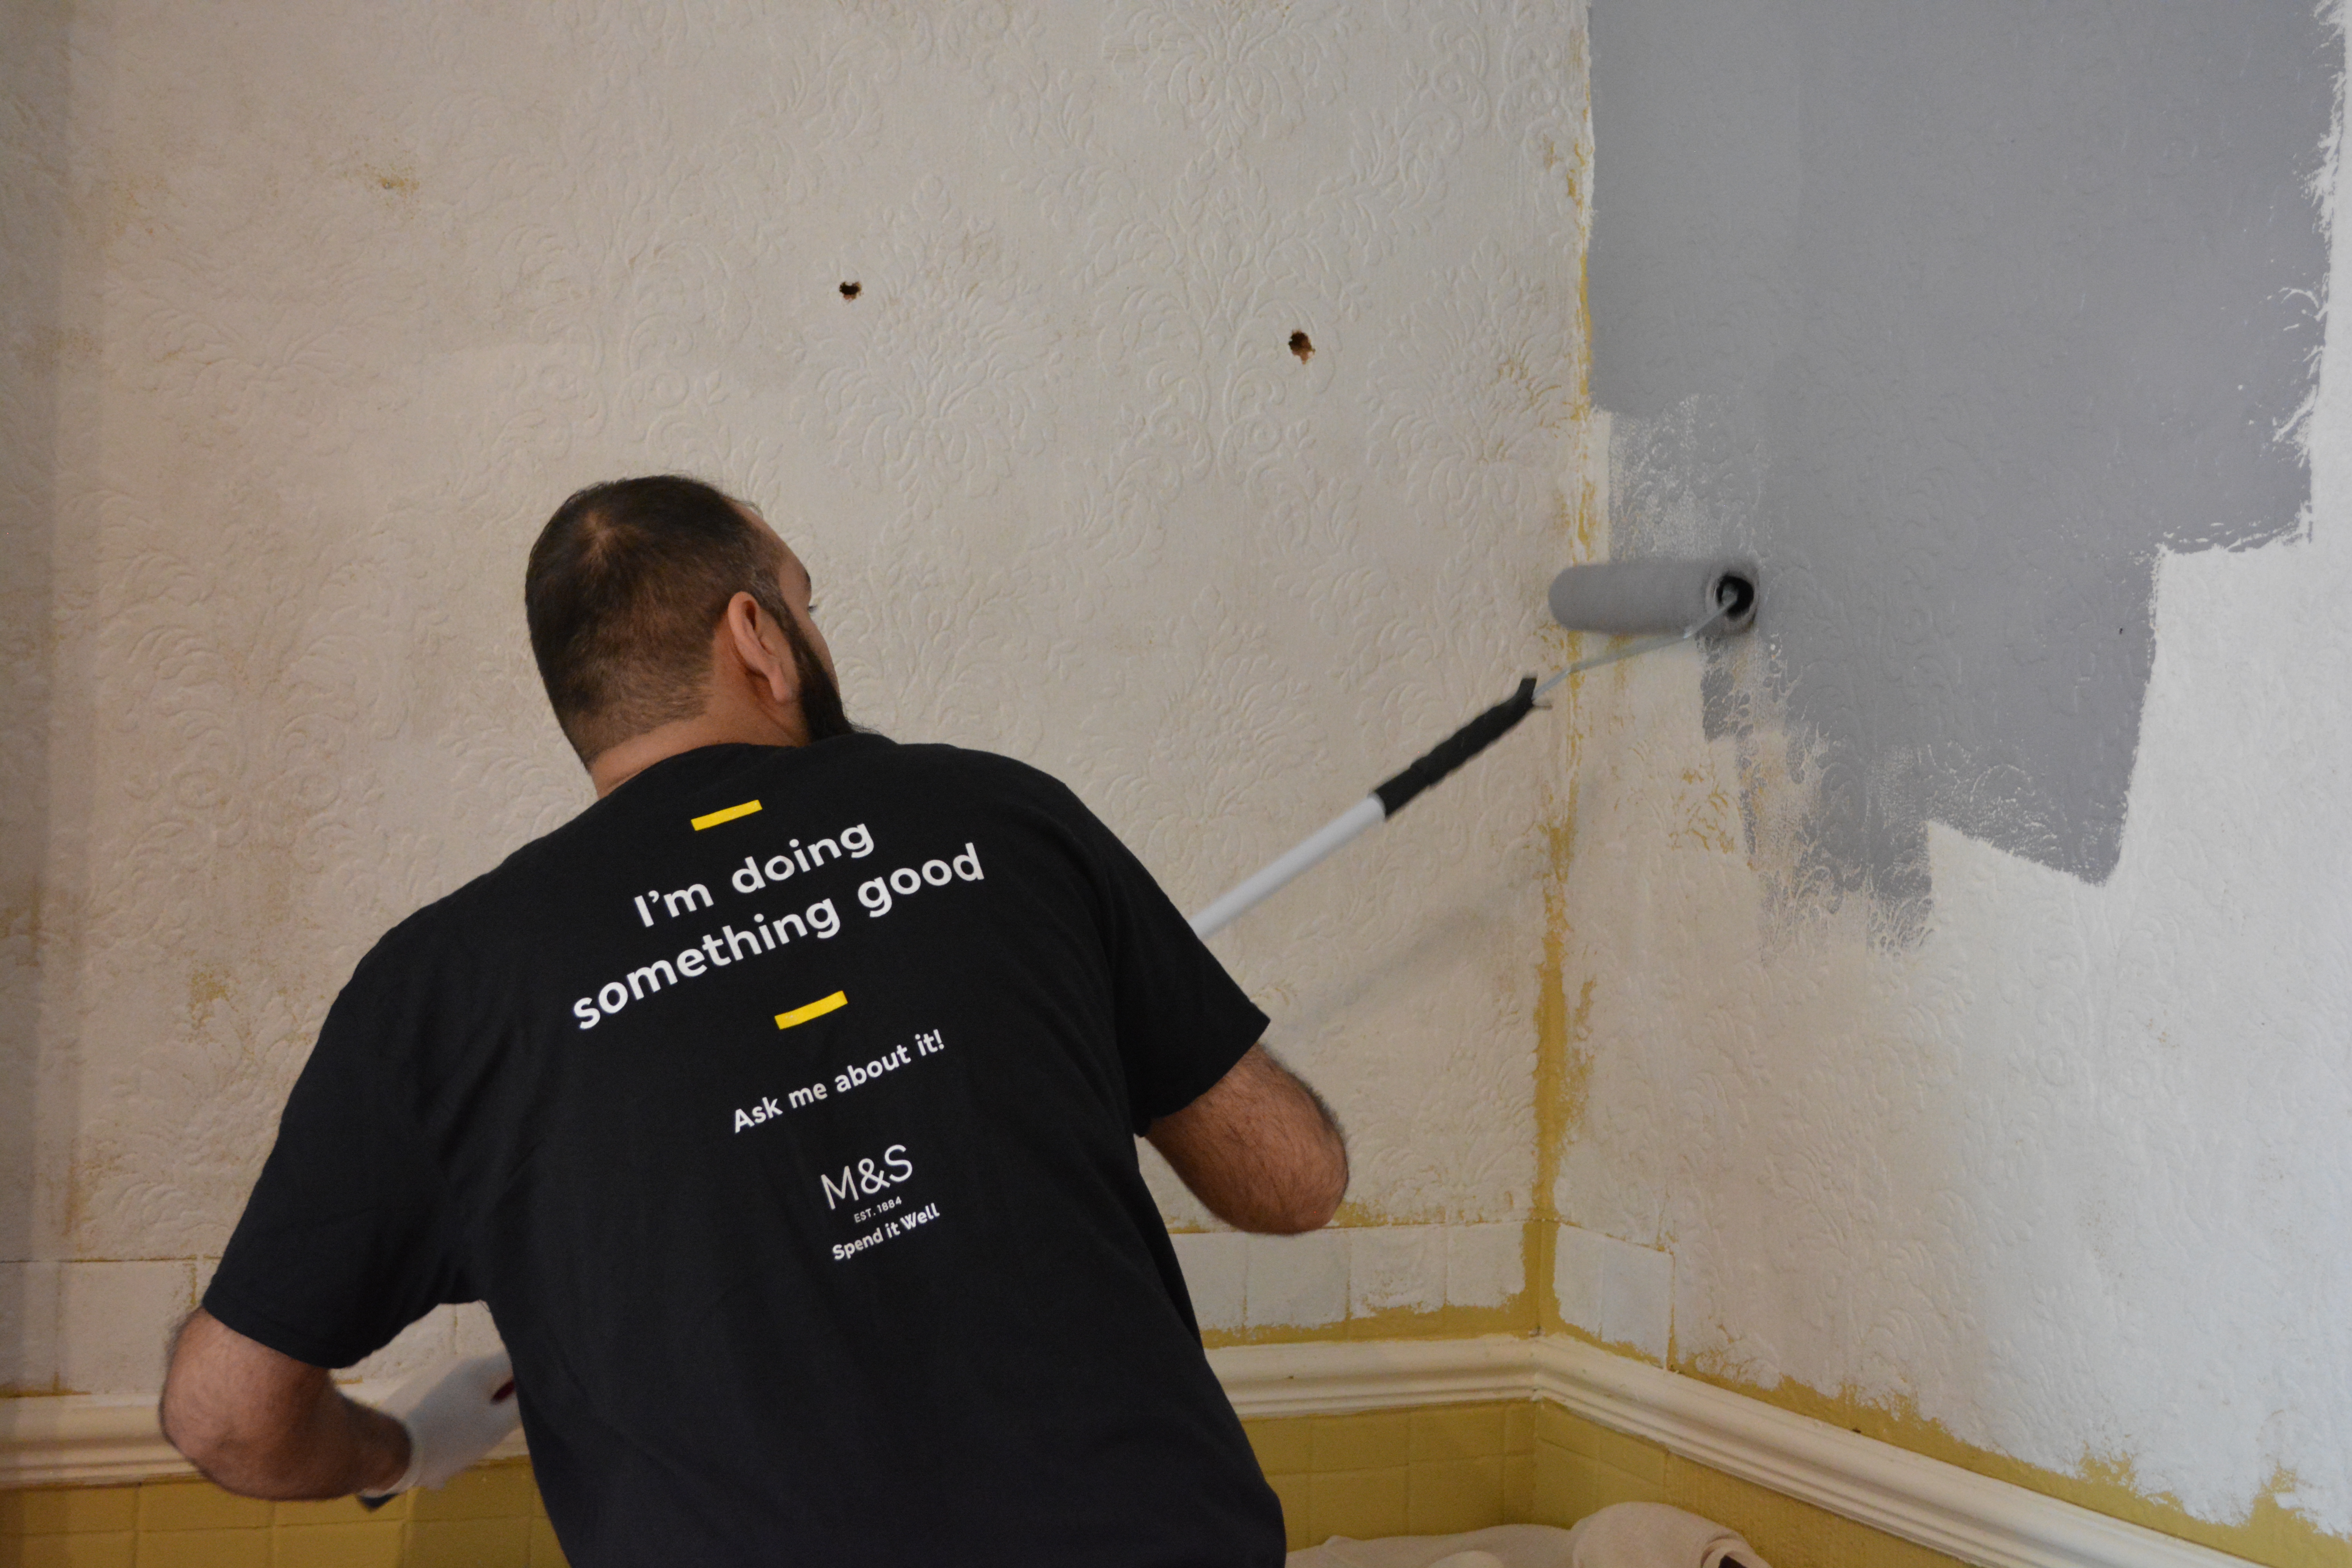 Paint volunteer redecorating a room in light grey paint.